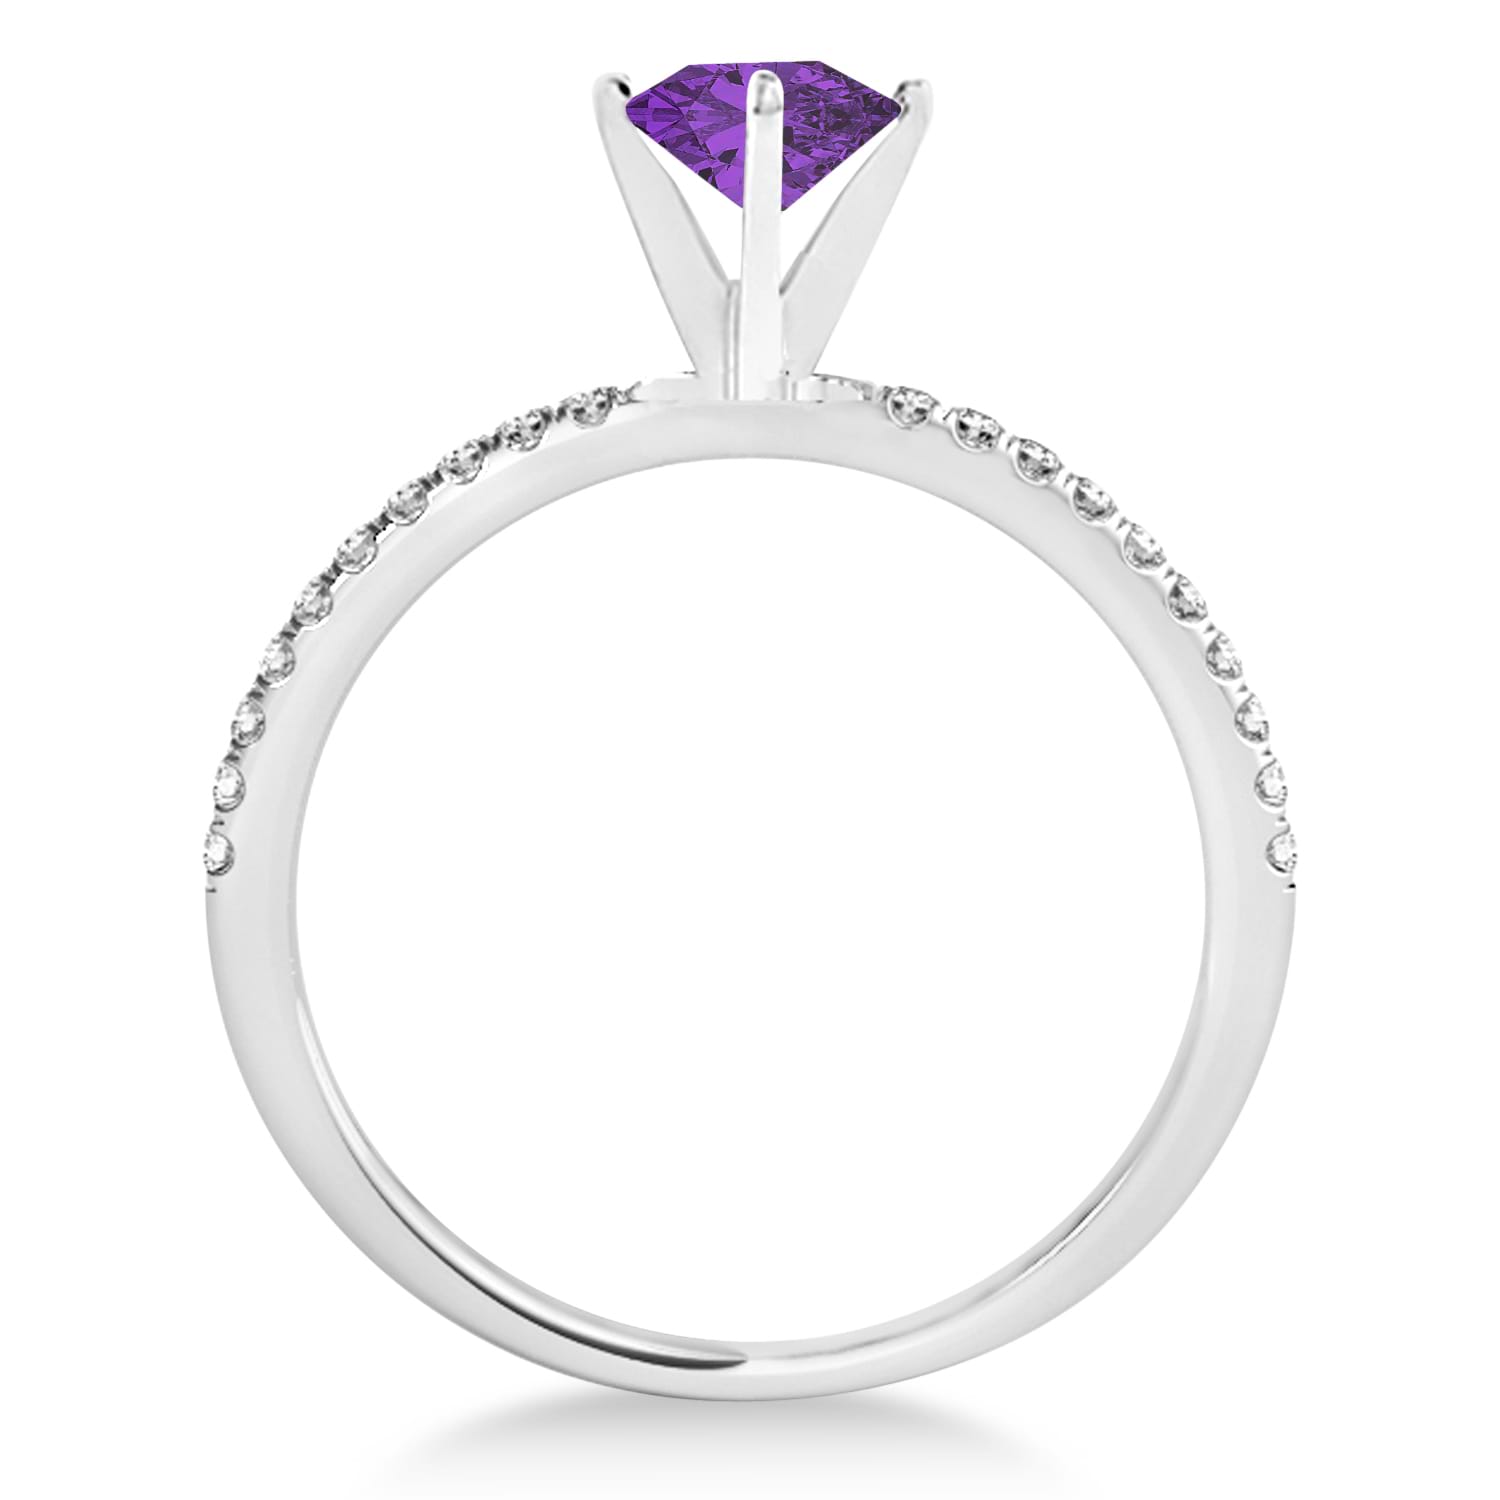 Amethyst & Diamond Accented Oval Shape Engagement Ring Platinum (3.00ct)